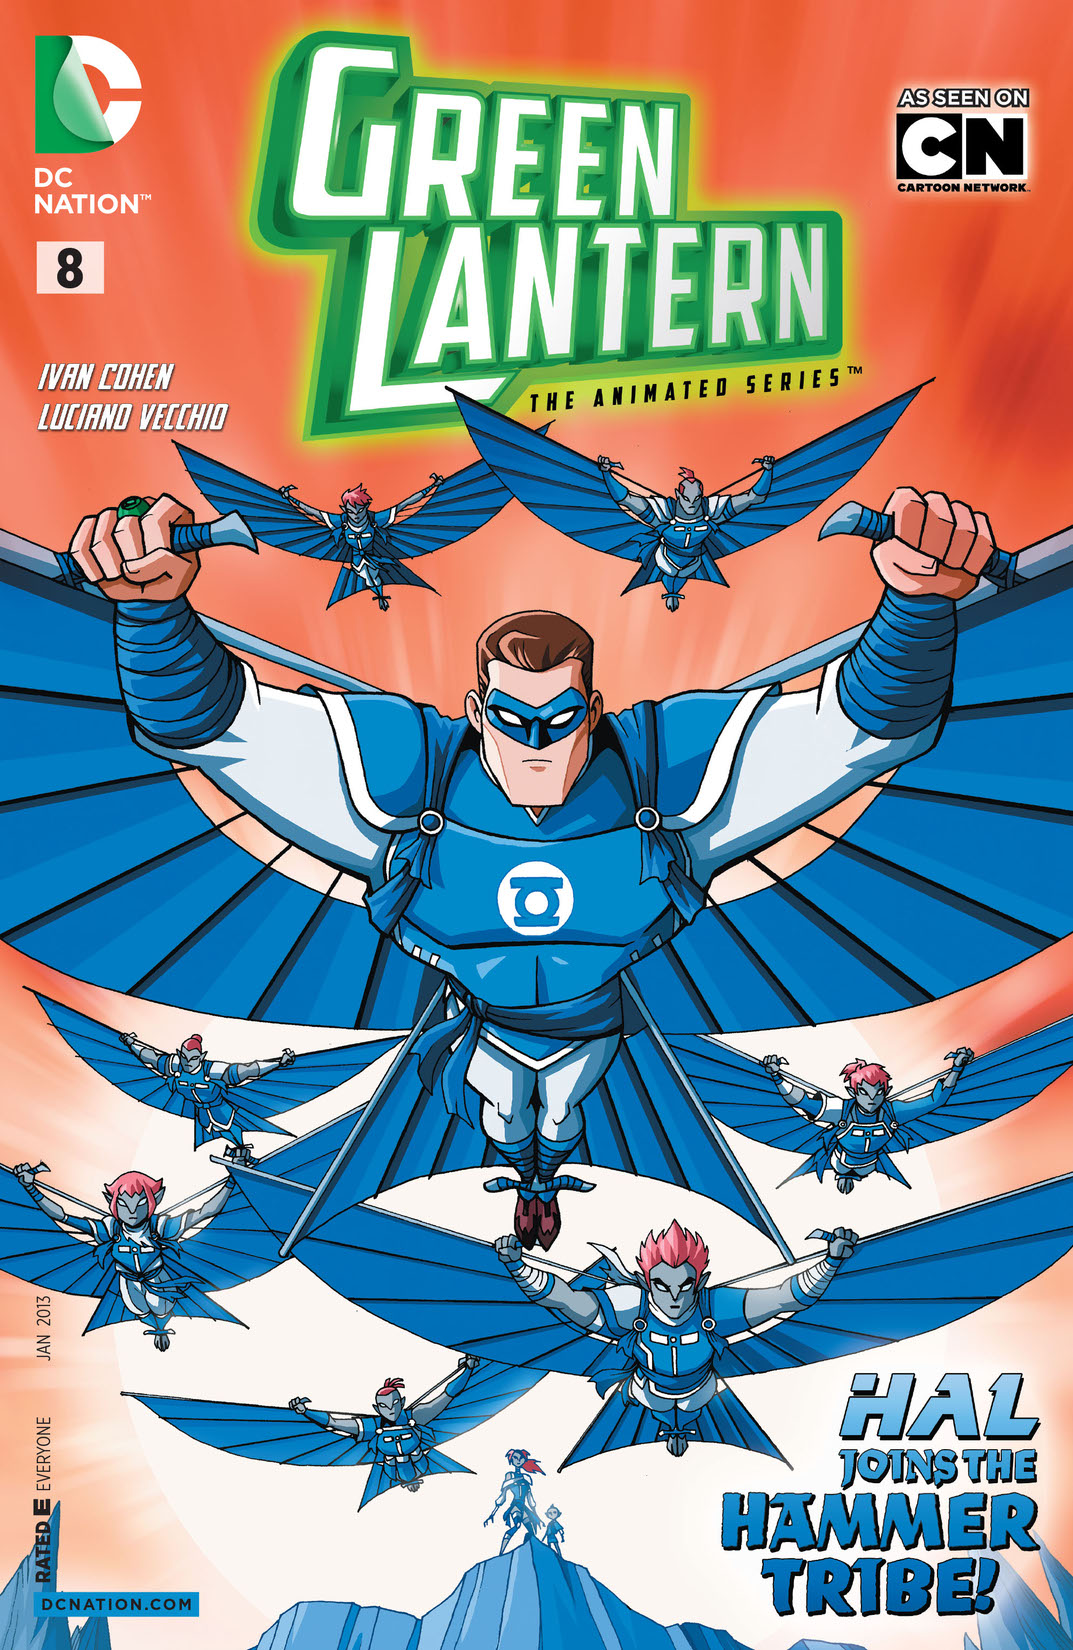 Green Lantern: The Animated Series #8 preview images